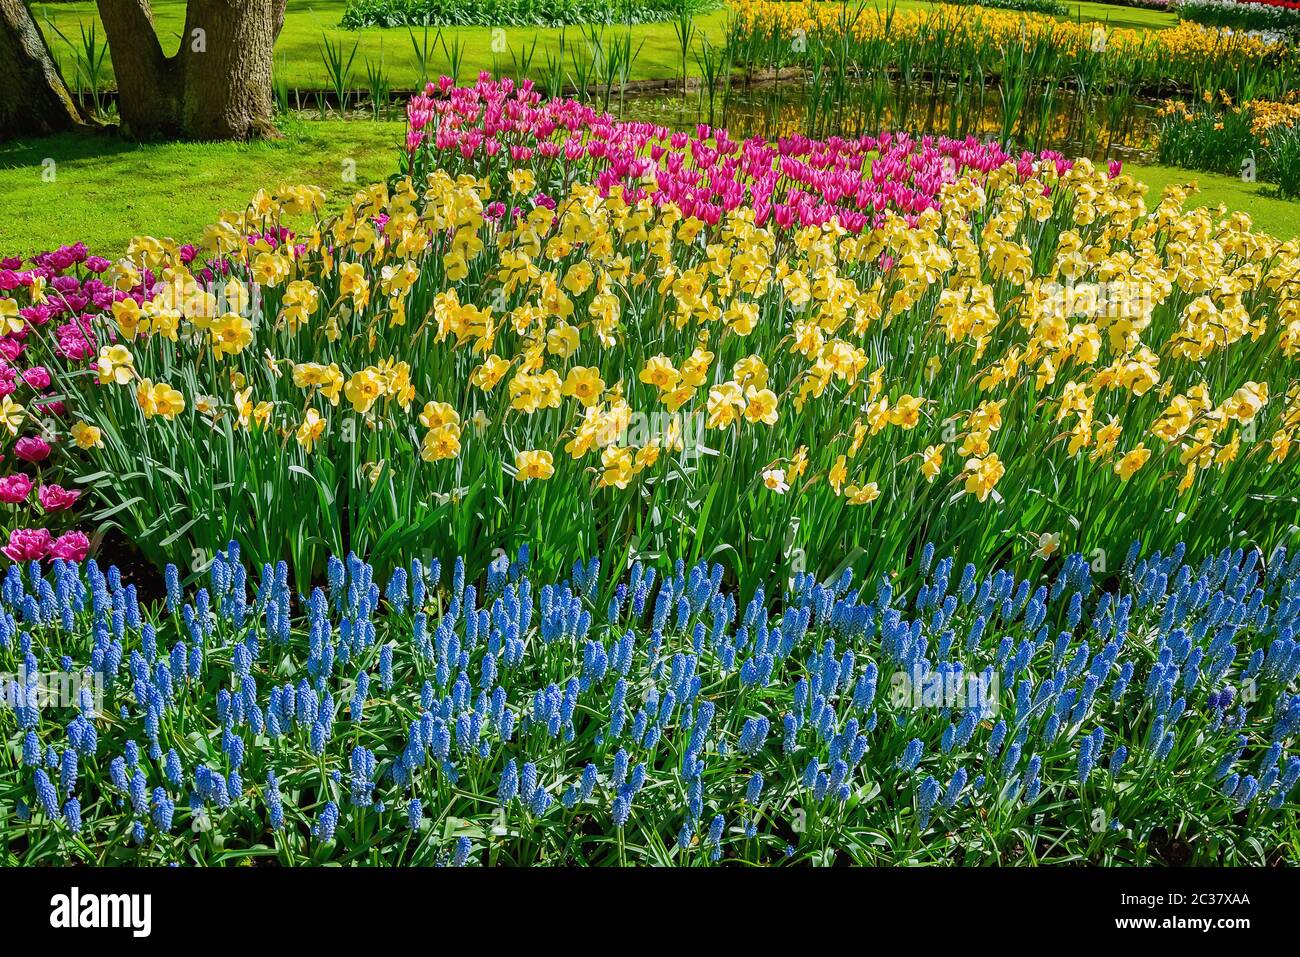 Flowerbed of narcissus and tulips Stock Photo